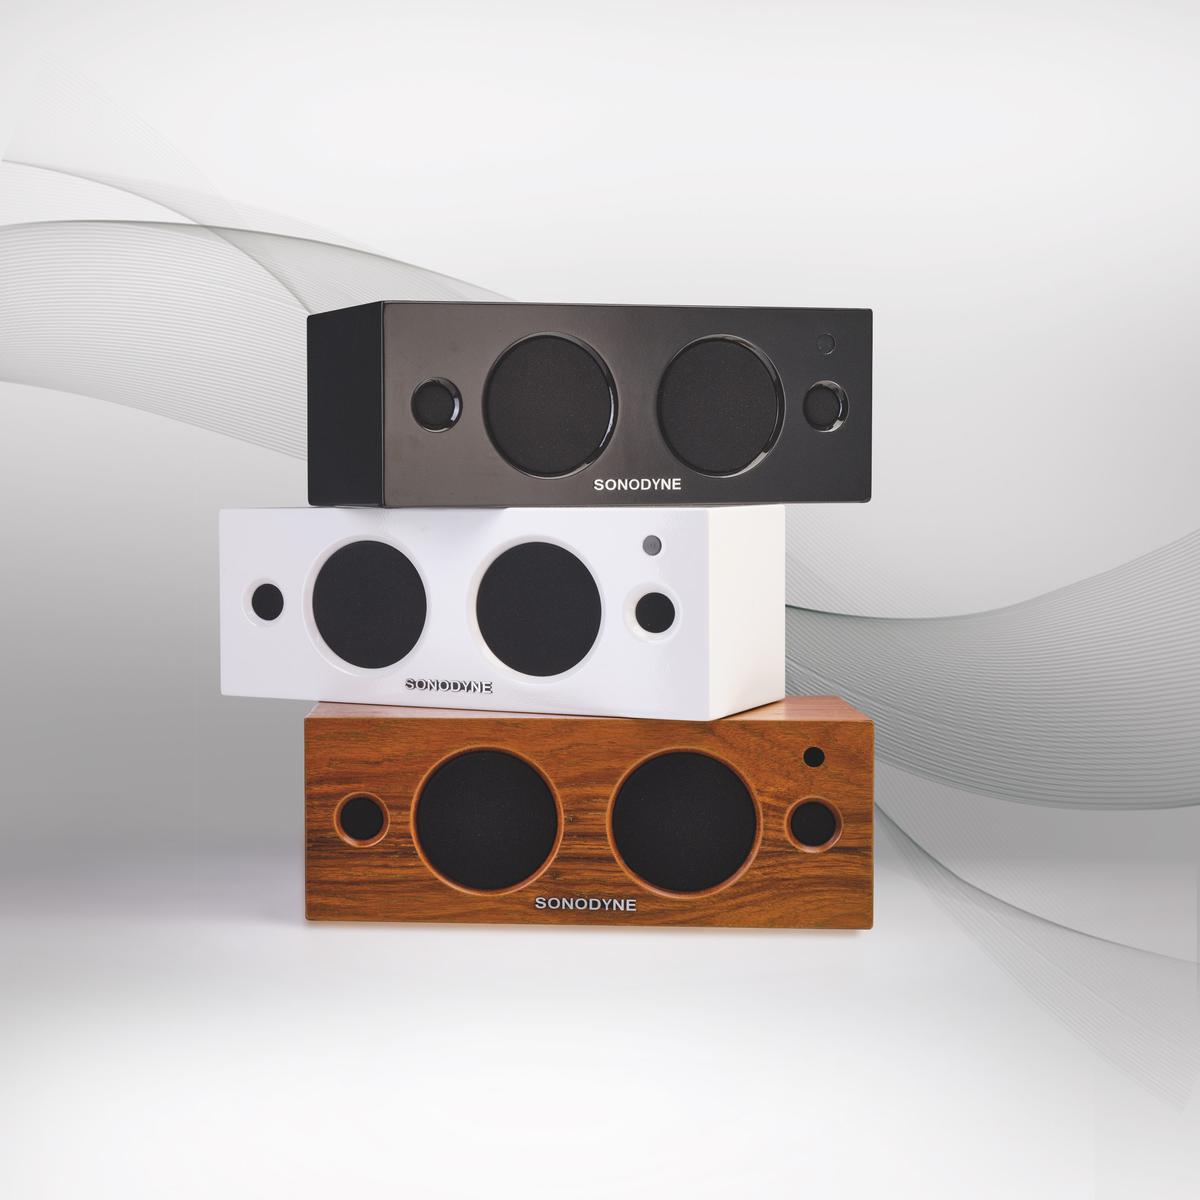 Sonodyne’s handcrafted Bluetooth stereo speakers launched in 2020.